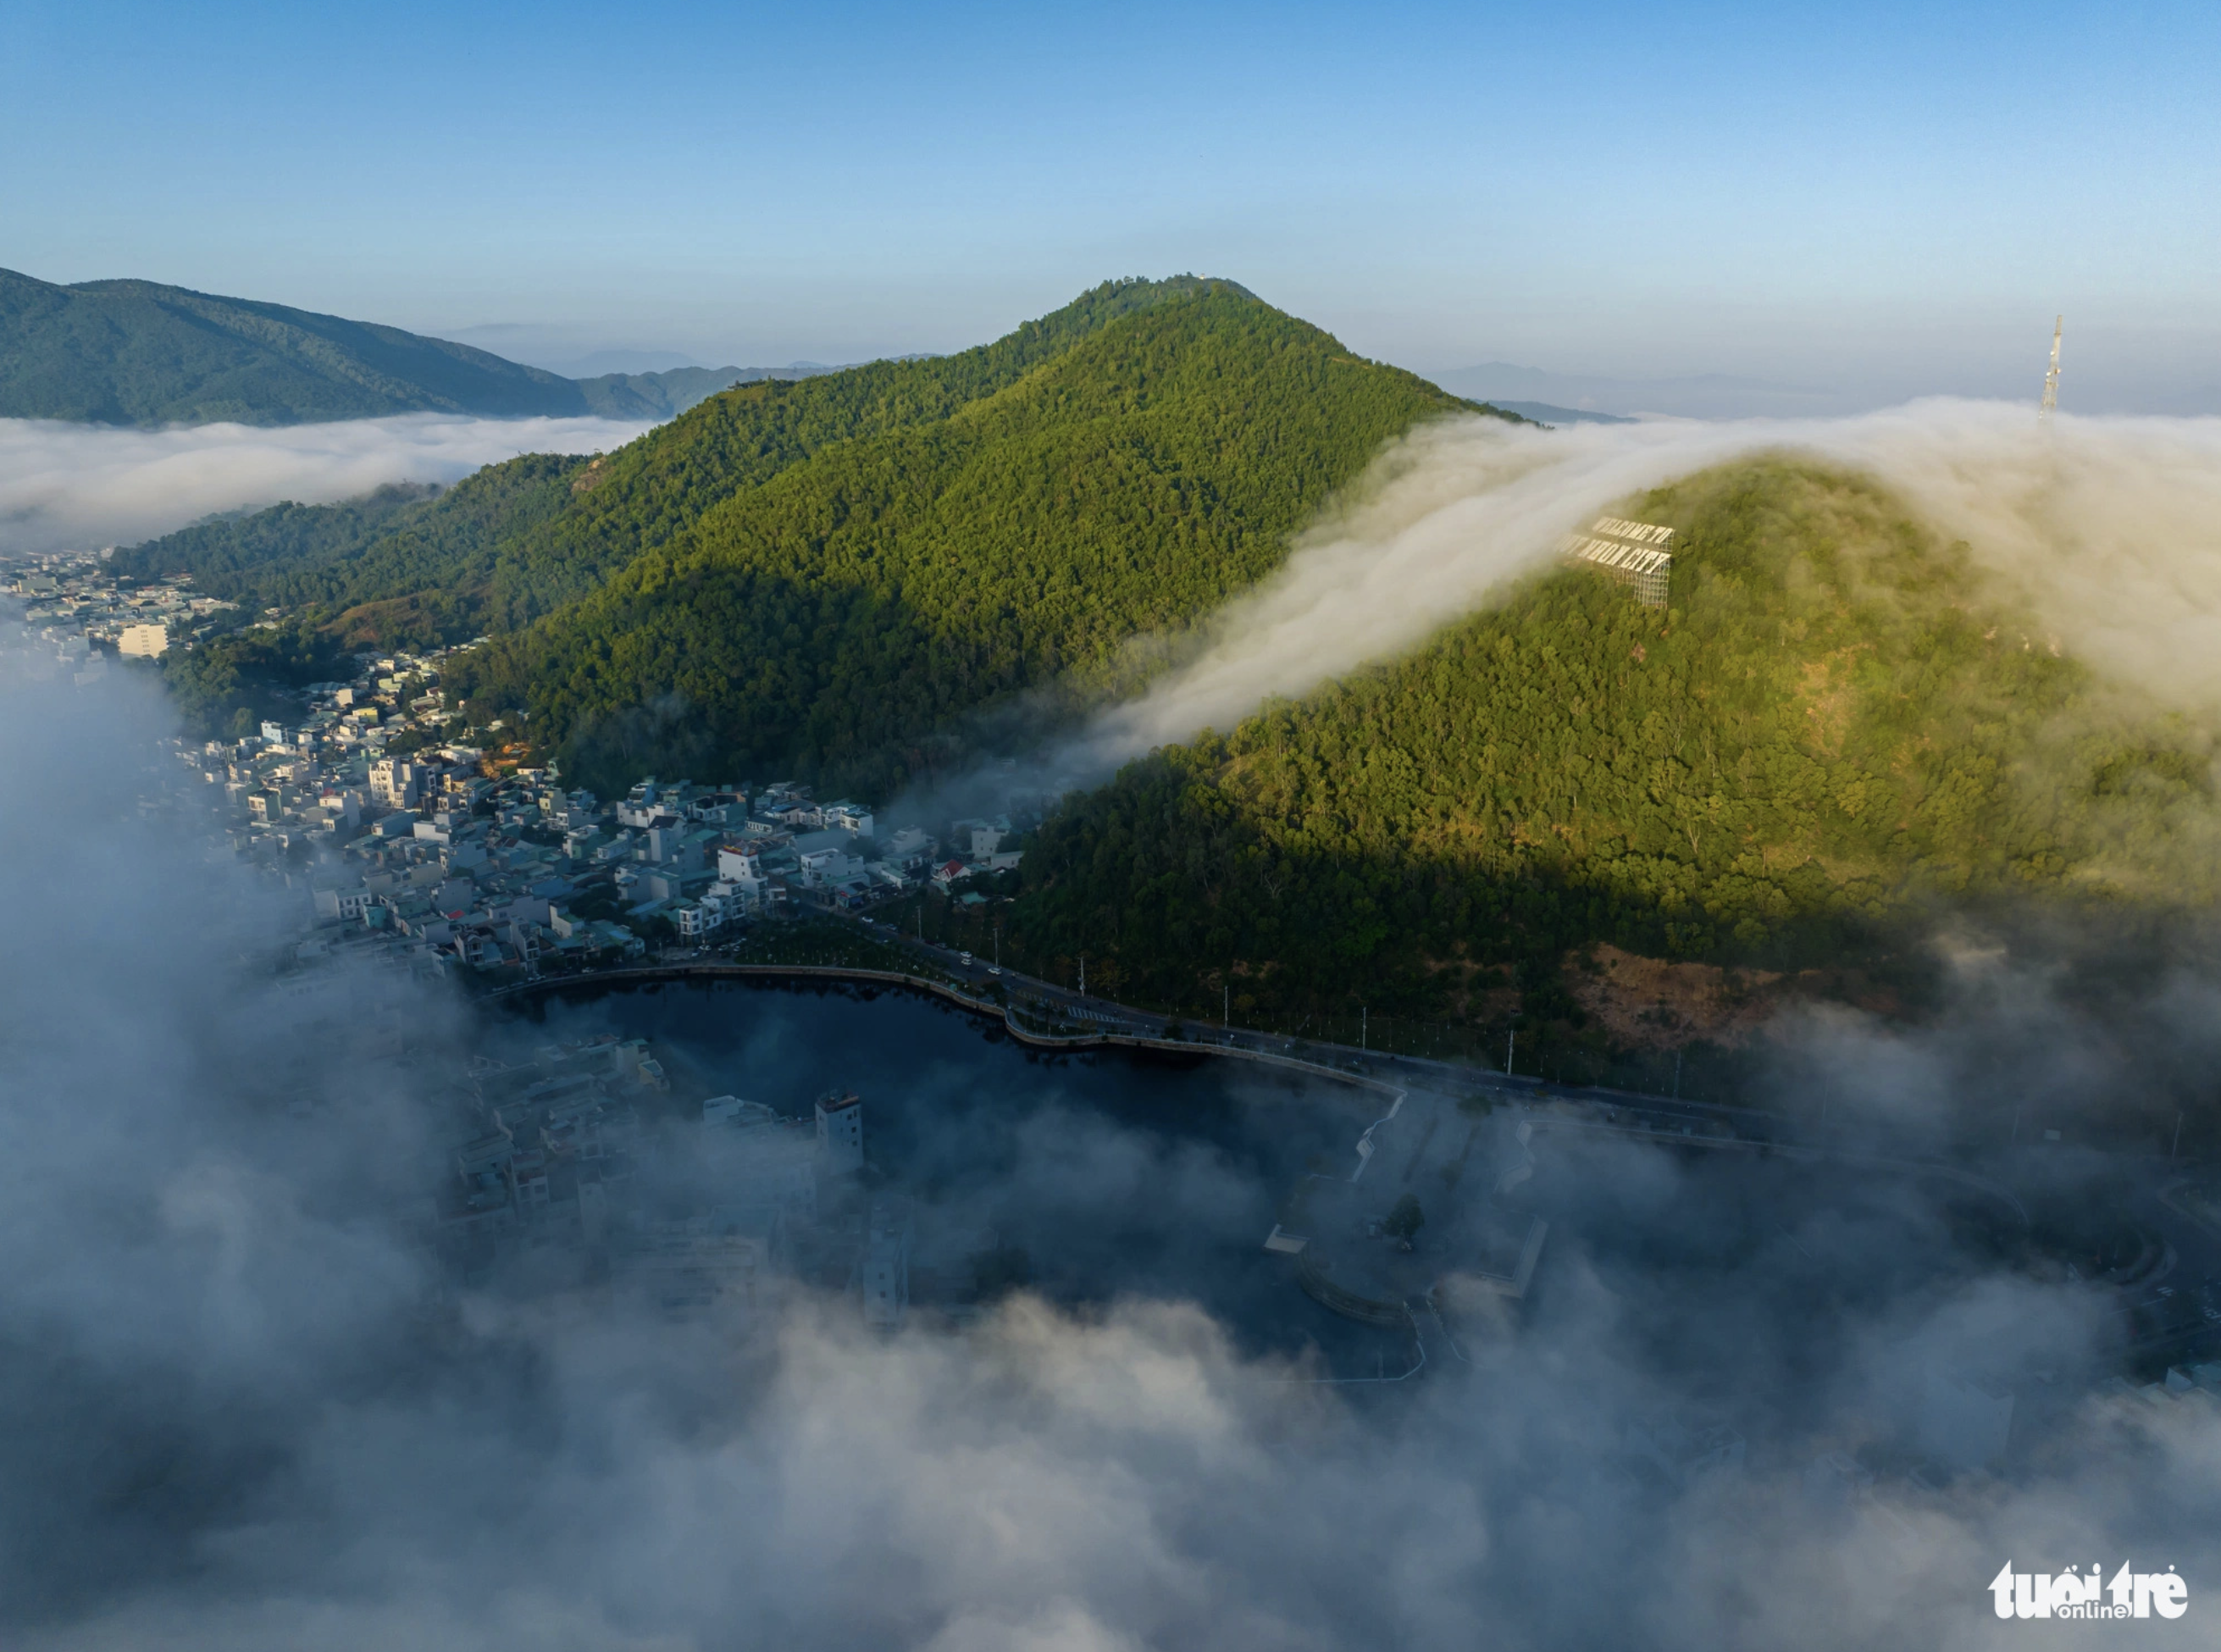 Quy Nhon City and surrounding mountains become stunning in thick mist. Photo: Dung Nhan / Tuoi Tre